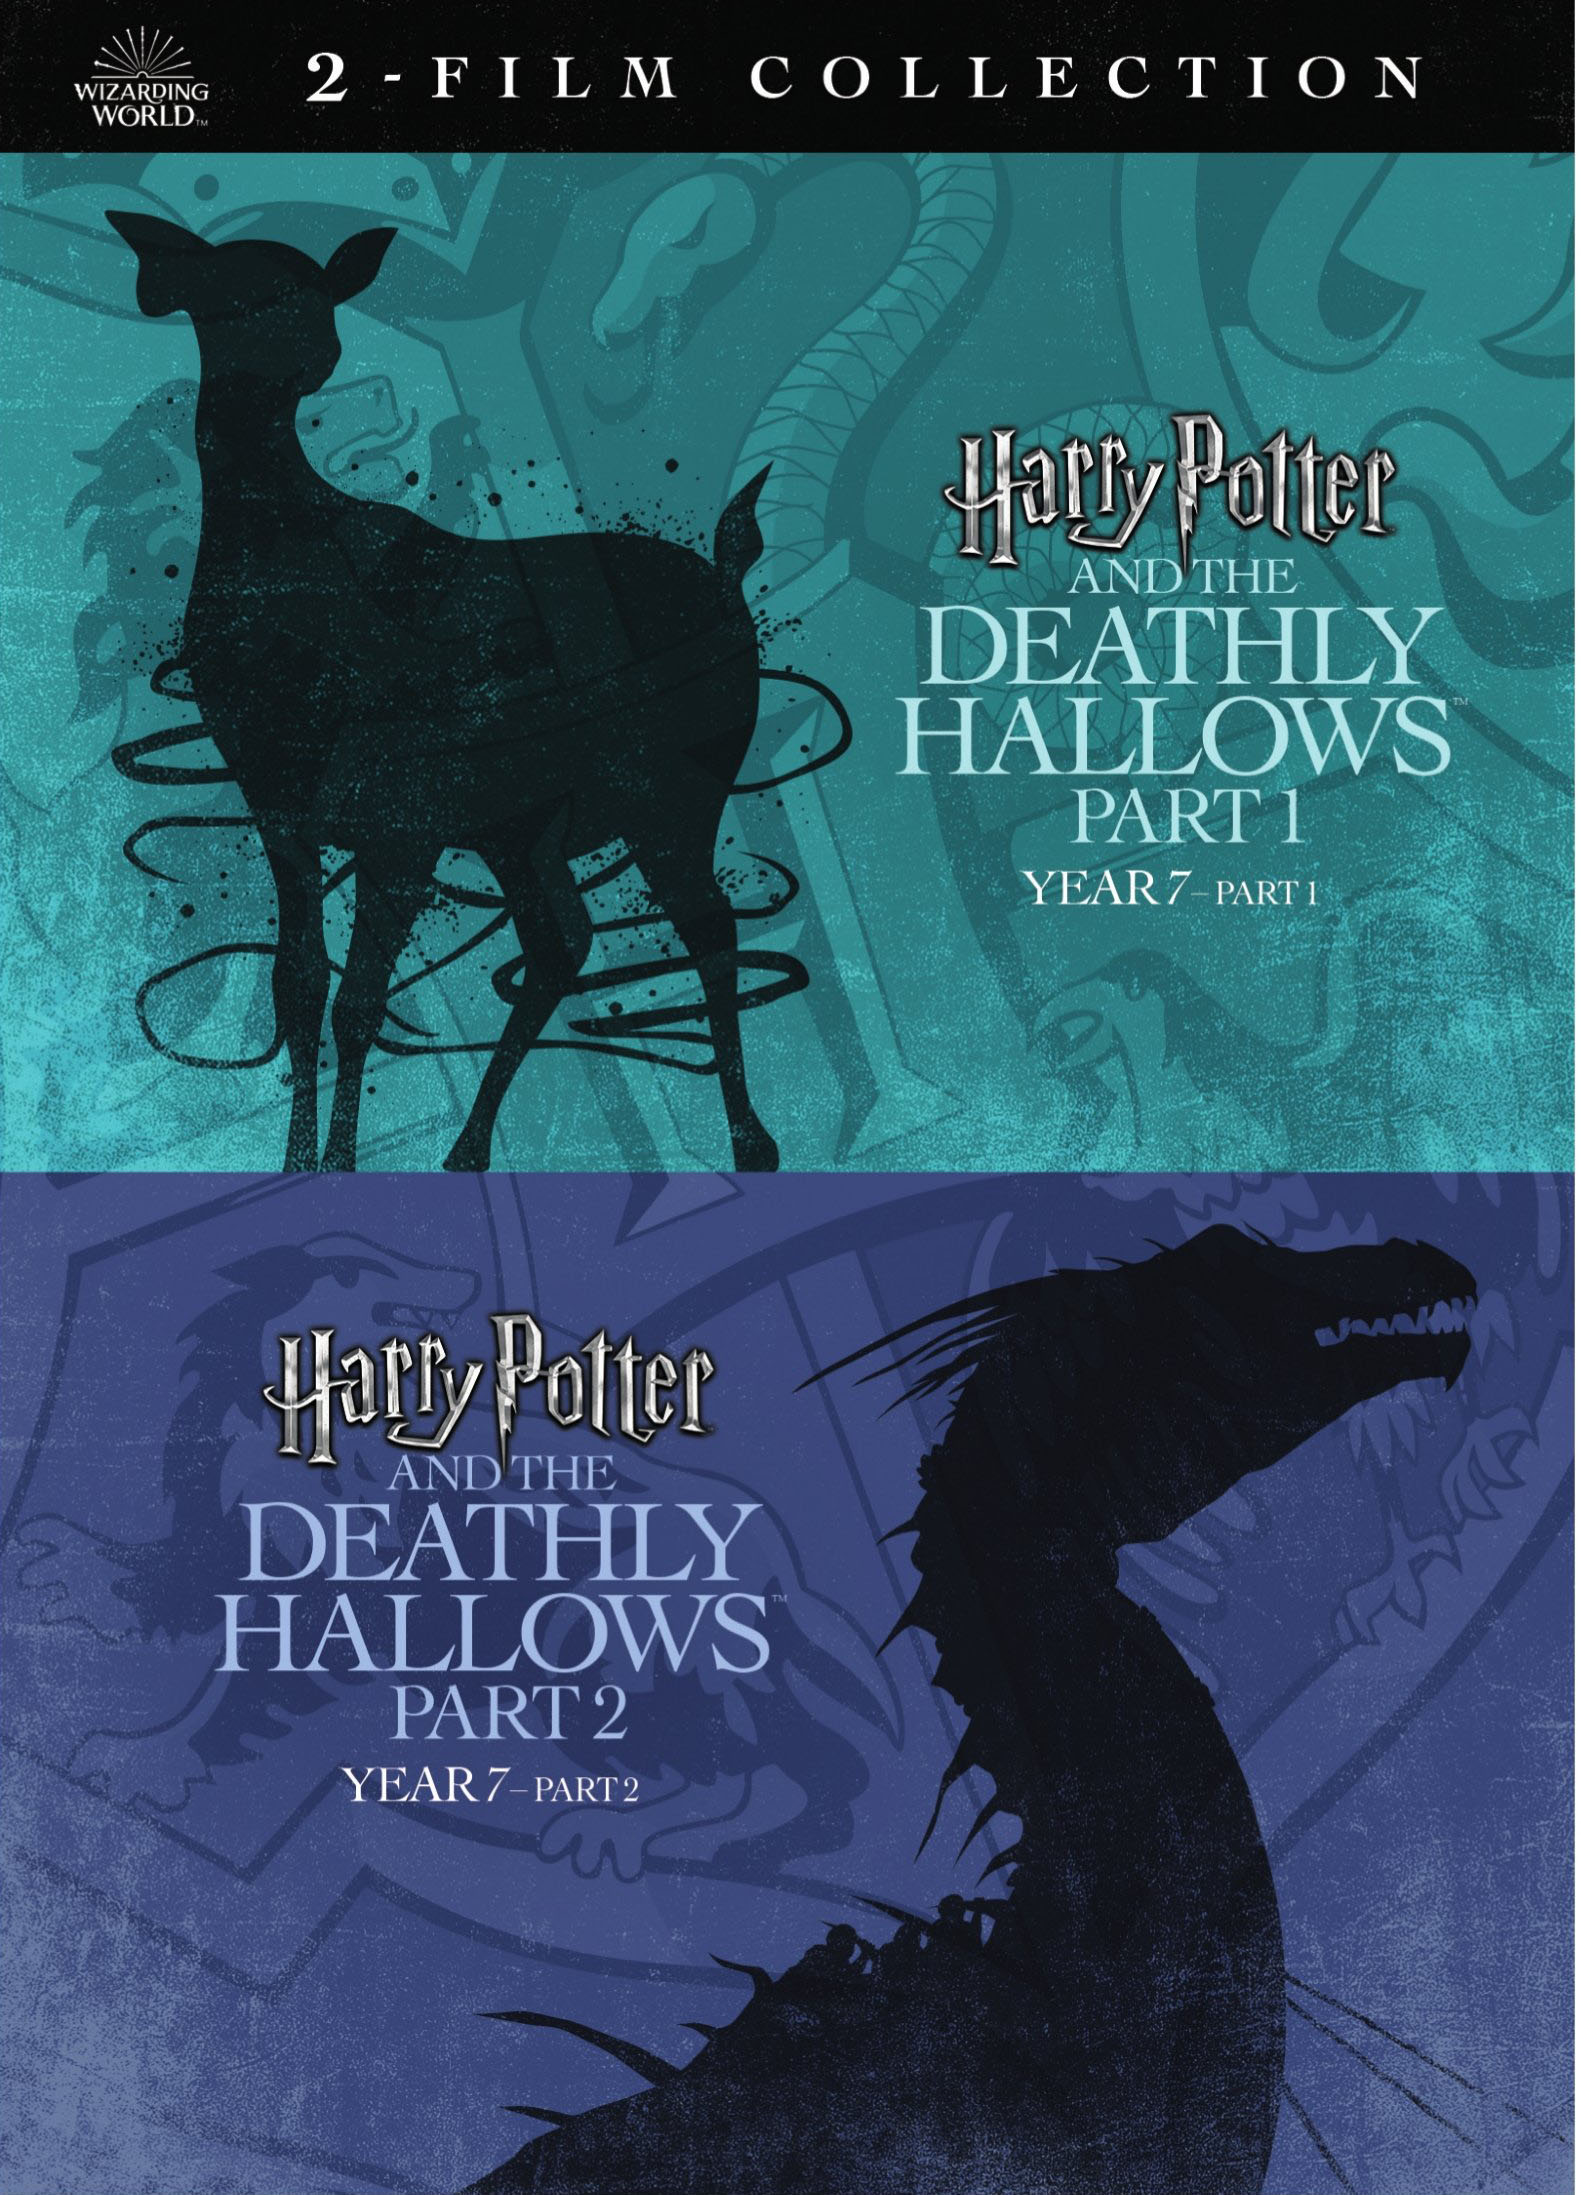 Harry Potter and the Deathly Hallows, Part 1 and 2 (DVD) - image 1 of 4